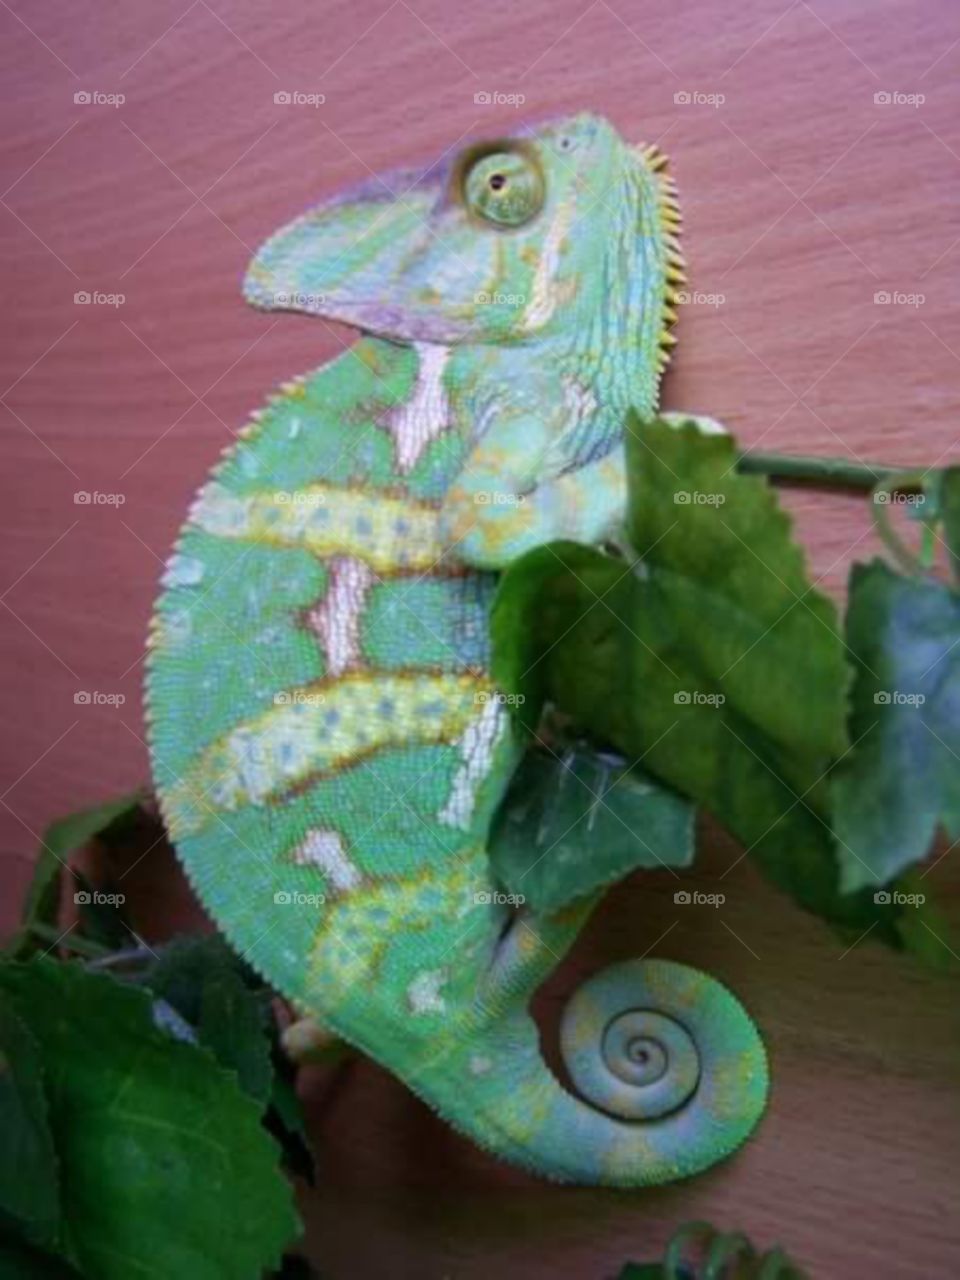 The veiled chameleon (Chamaeleo calyptratus) is a species of chameleon native to the Arabian Peninsula in Yemen and Saudi Arabia. Other common names include cone-head chameleon and Yemen chameleon.

The veiled chameleon is the logo of the SUSE Linux operating system.